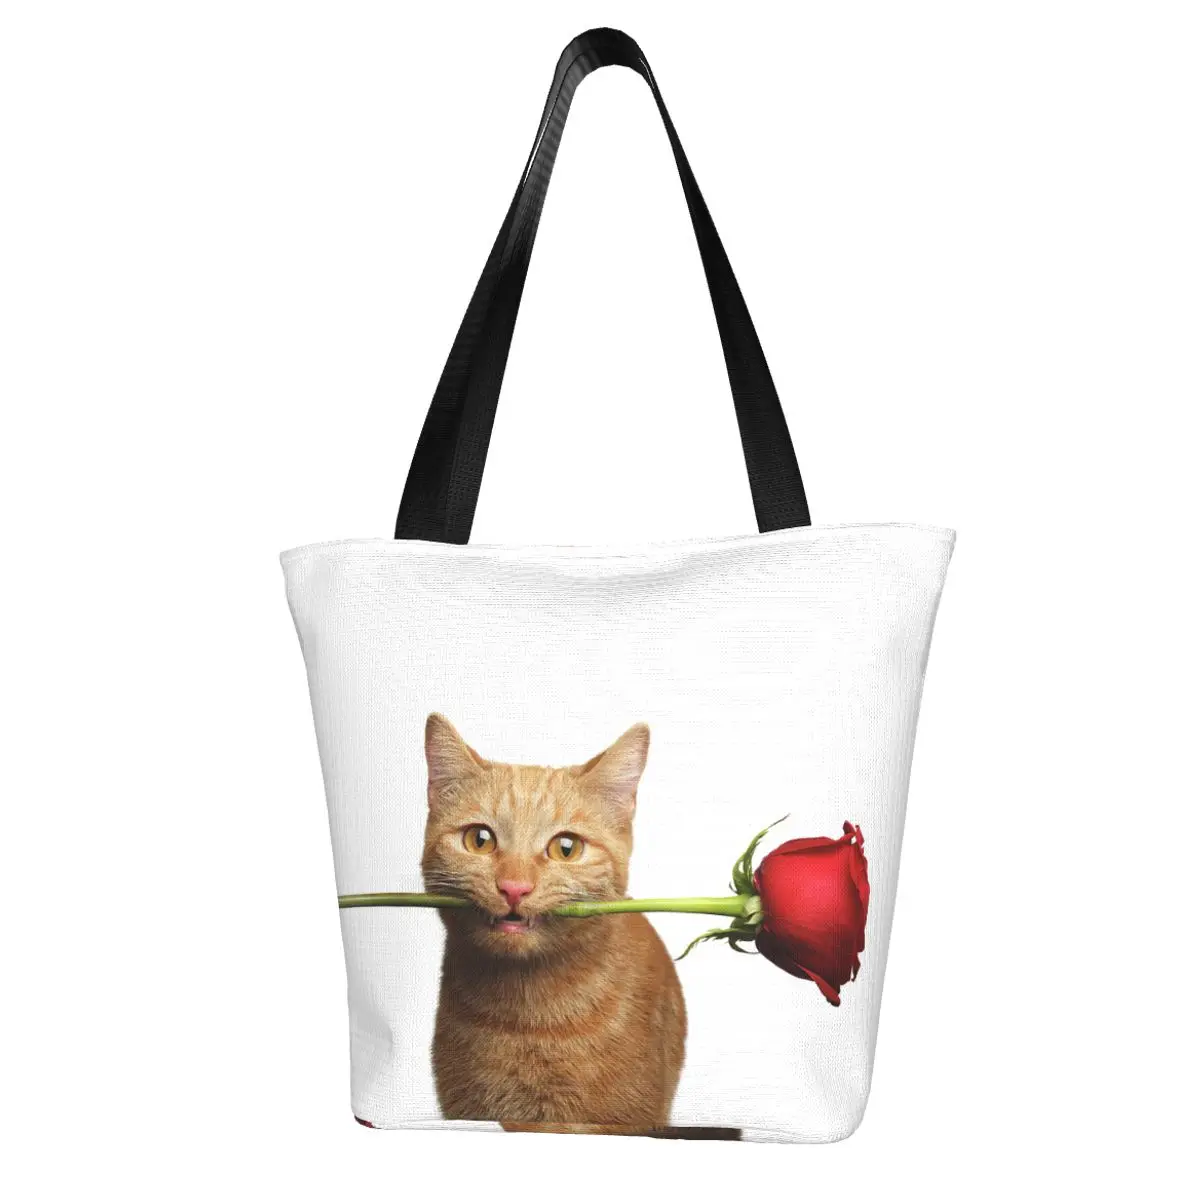 Portrait Of Ginger Cat Brought Rose Shopping Bag Aesthetic Cloth Outdoor Handbag Female Fashion Bags